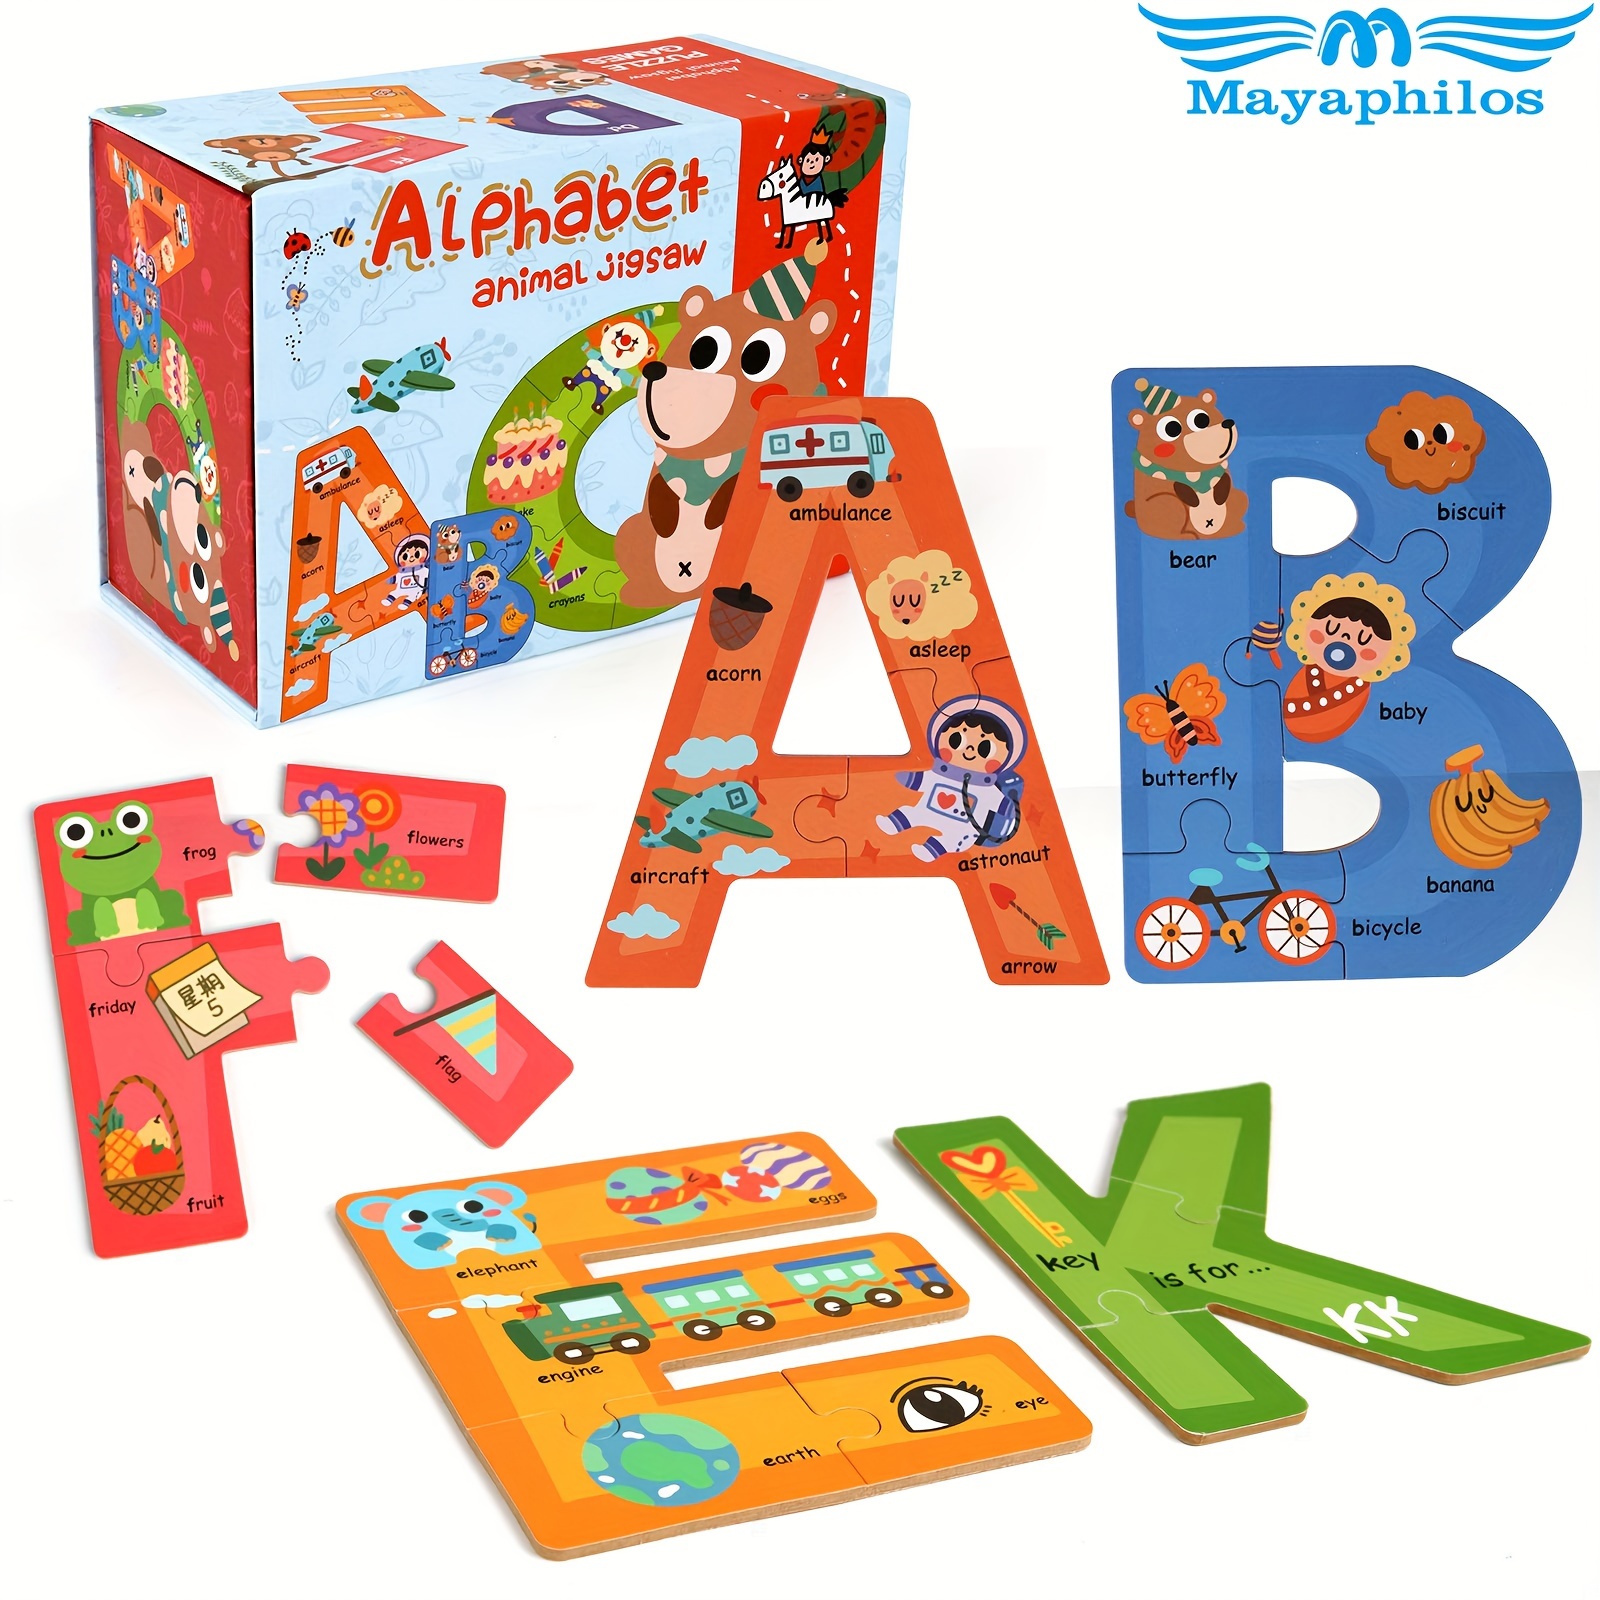 

Educational Wooden Alphabet & Number Puzzles For Kids, Abc Sight Words Learning & Animal Puzzles, Stem Preschool Toys For Boys & Girls Christmas Halloween Thanksgiving Birthday Gift